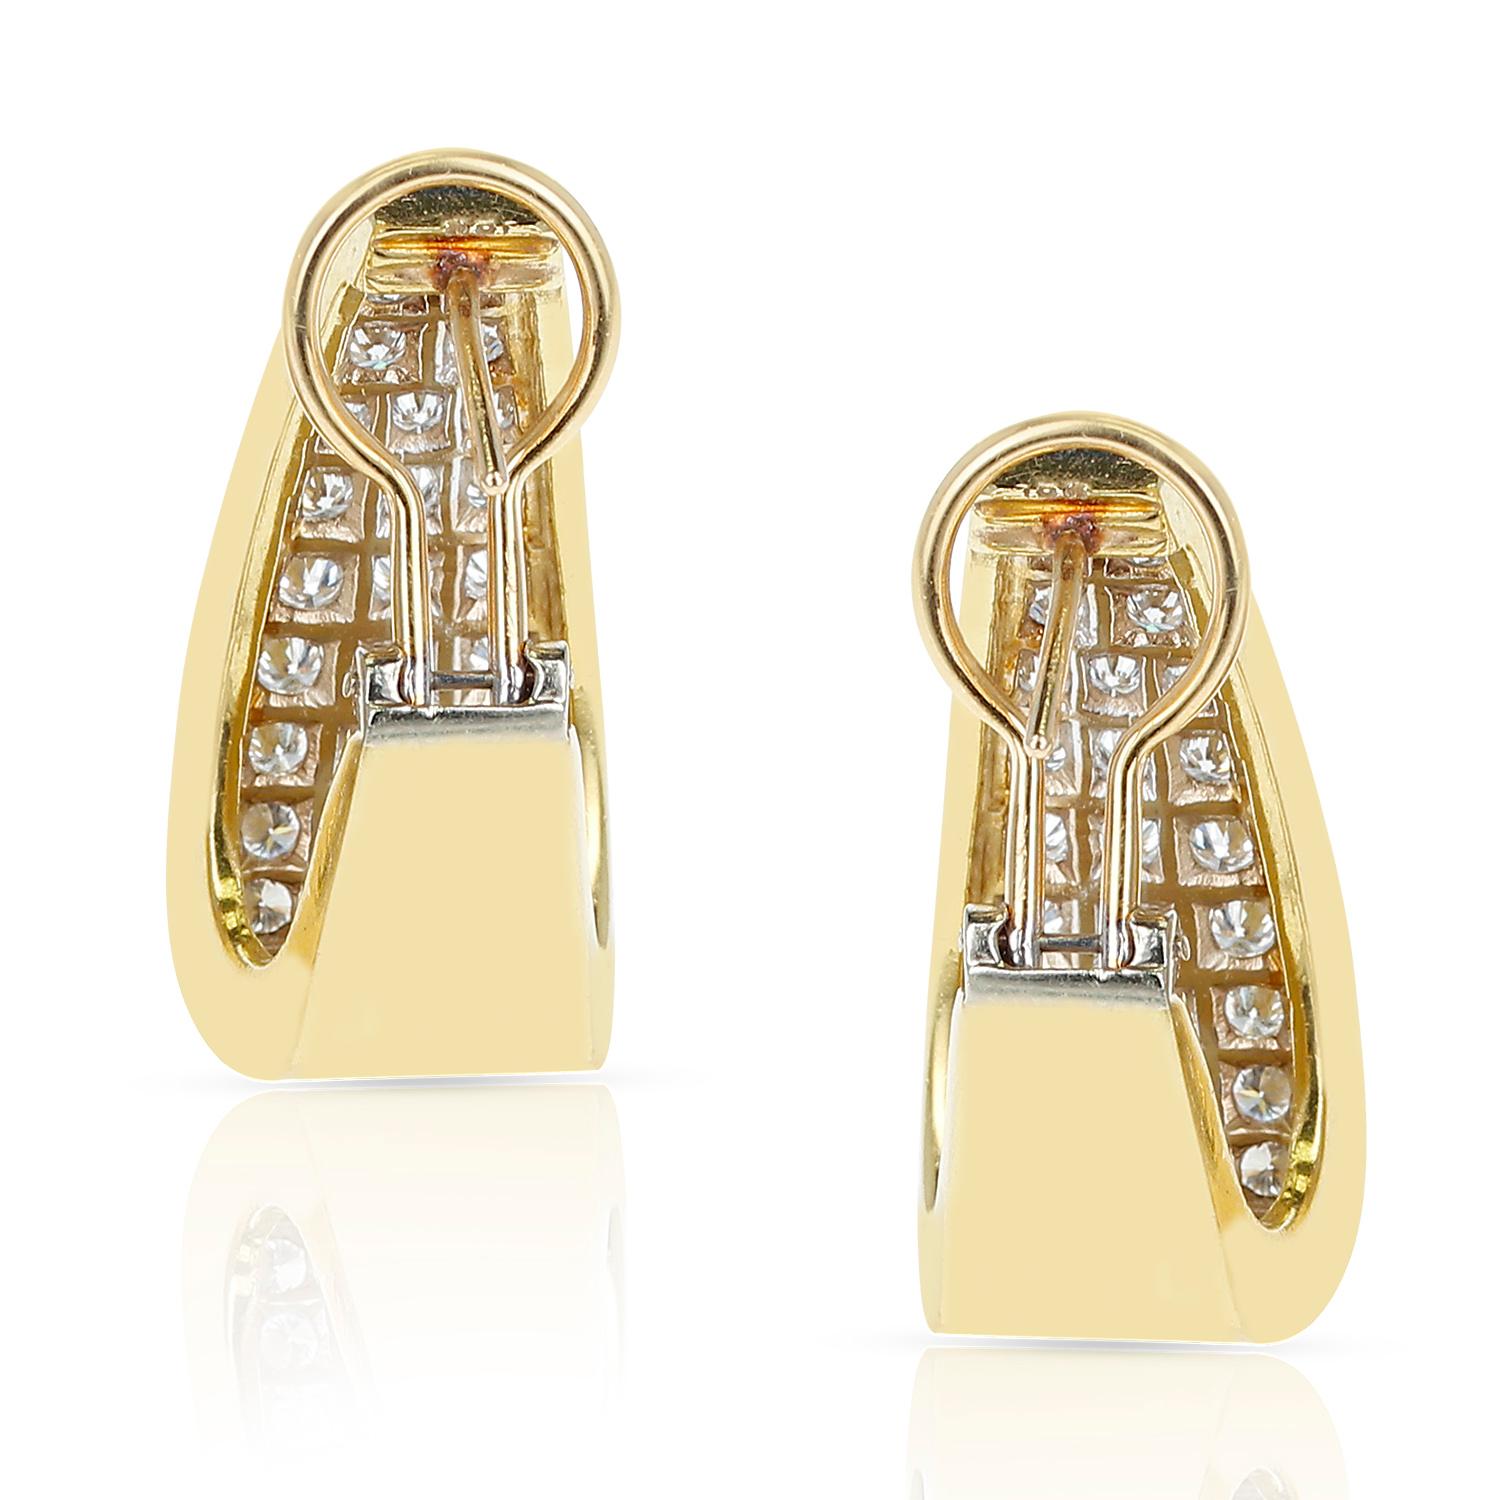 A pair of diamonds and yellow gold earrings made in 18 Karat Yellow Gold. The length of the earring is 1 1/8